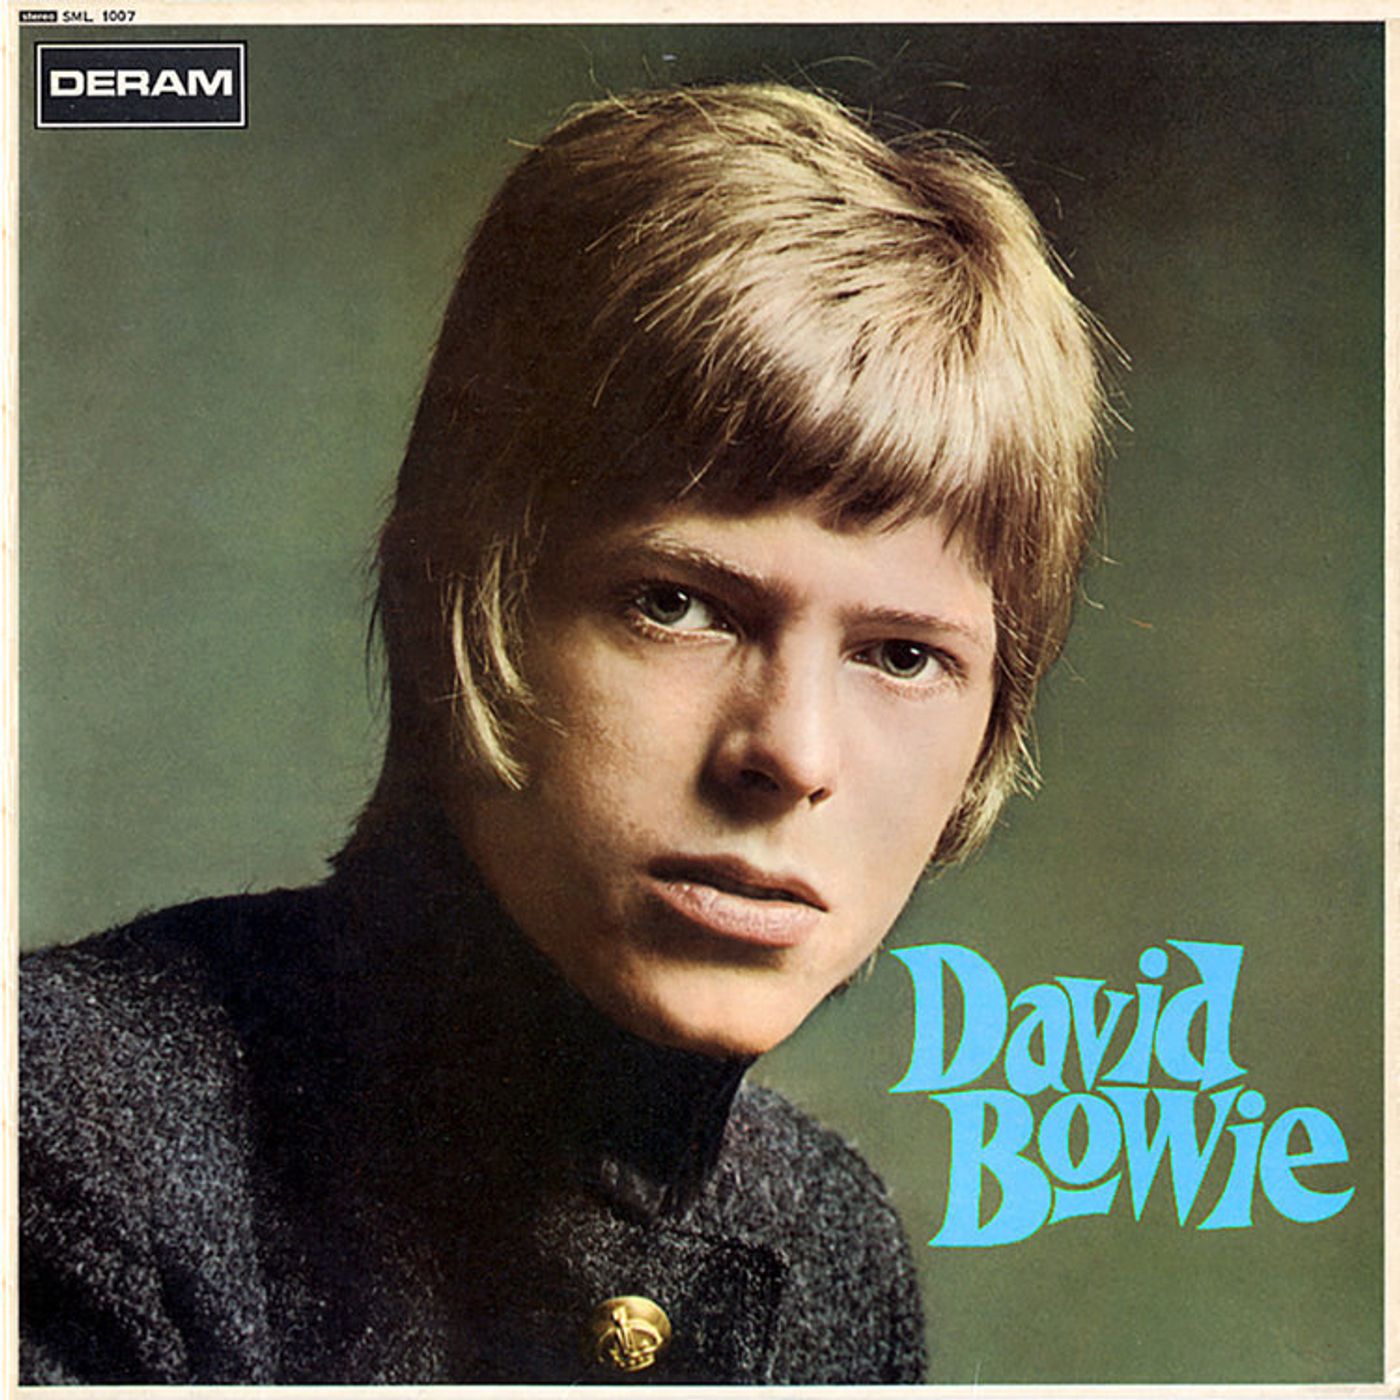 S3 Ep14: Chris O'Leary on David Bowie (1967)